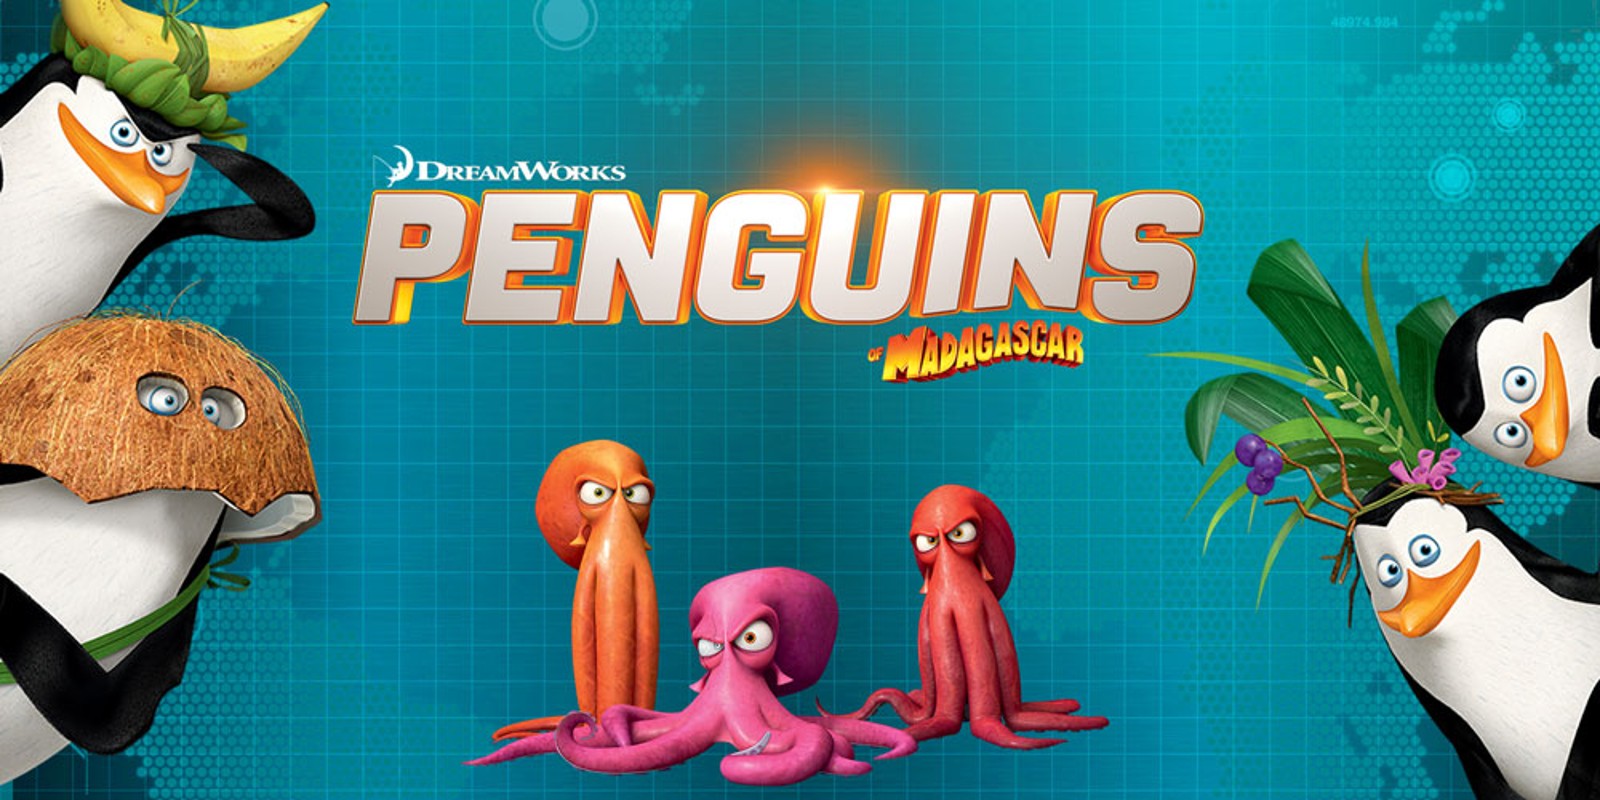 the penguins of madagascar wii